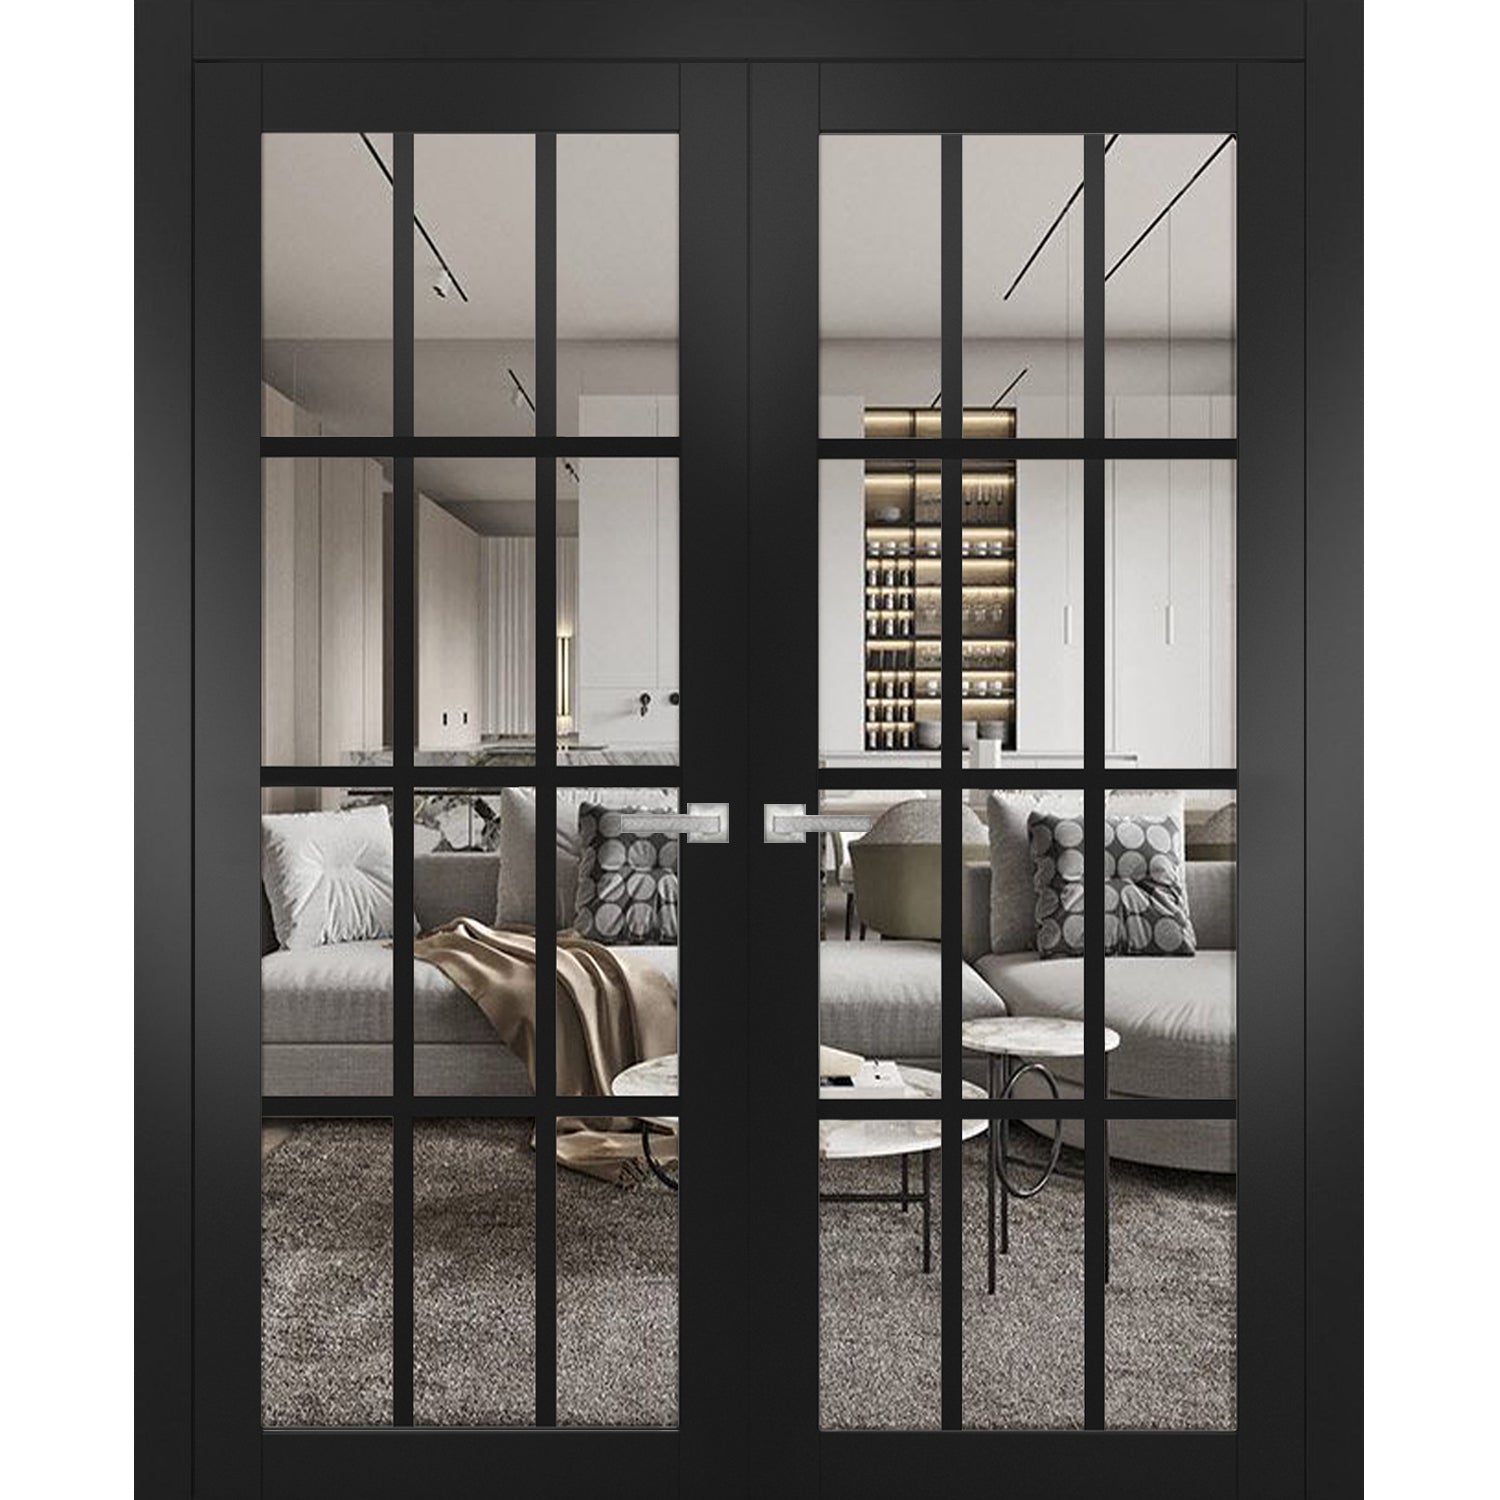 Solid French Double Doors | Felicia 3355 Matte Black with Clear Glass | Wood Solid Panel Frame Trims | Closet Bedroom Sturdy Doors -60" x 80" (2* 30x80)-Butterfly